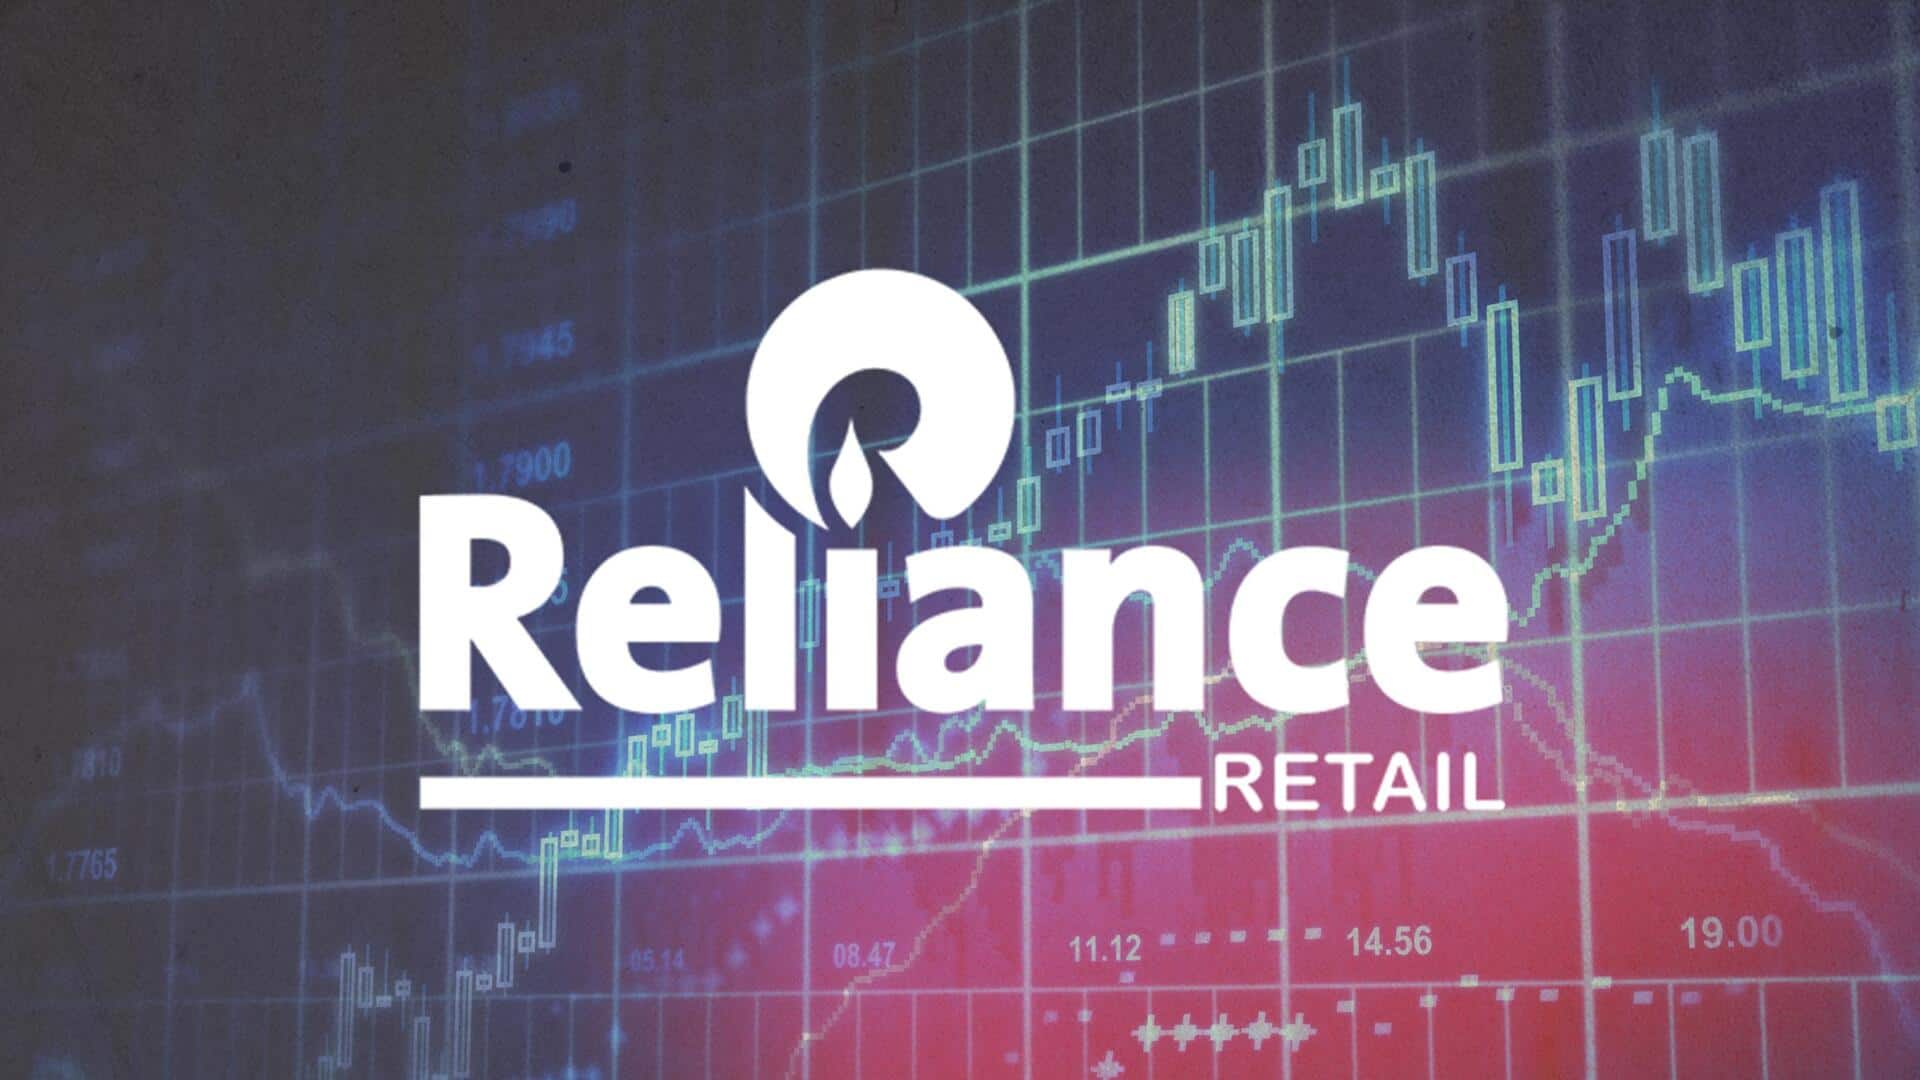 Reliance Retail's IPO prep: RIL could sell 8-10% stake